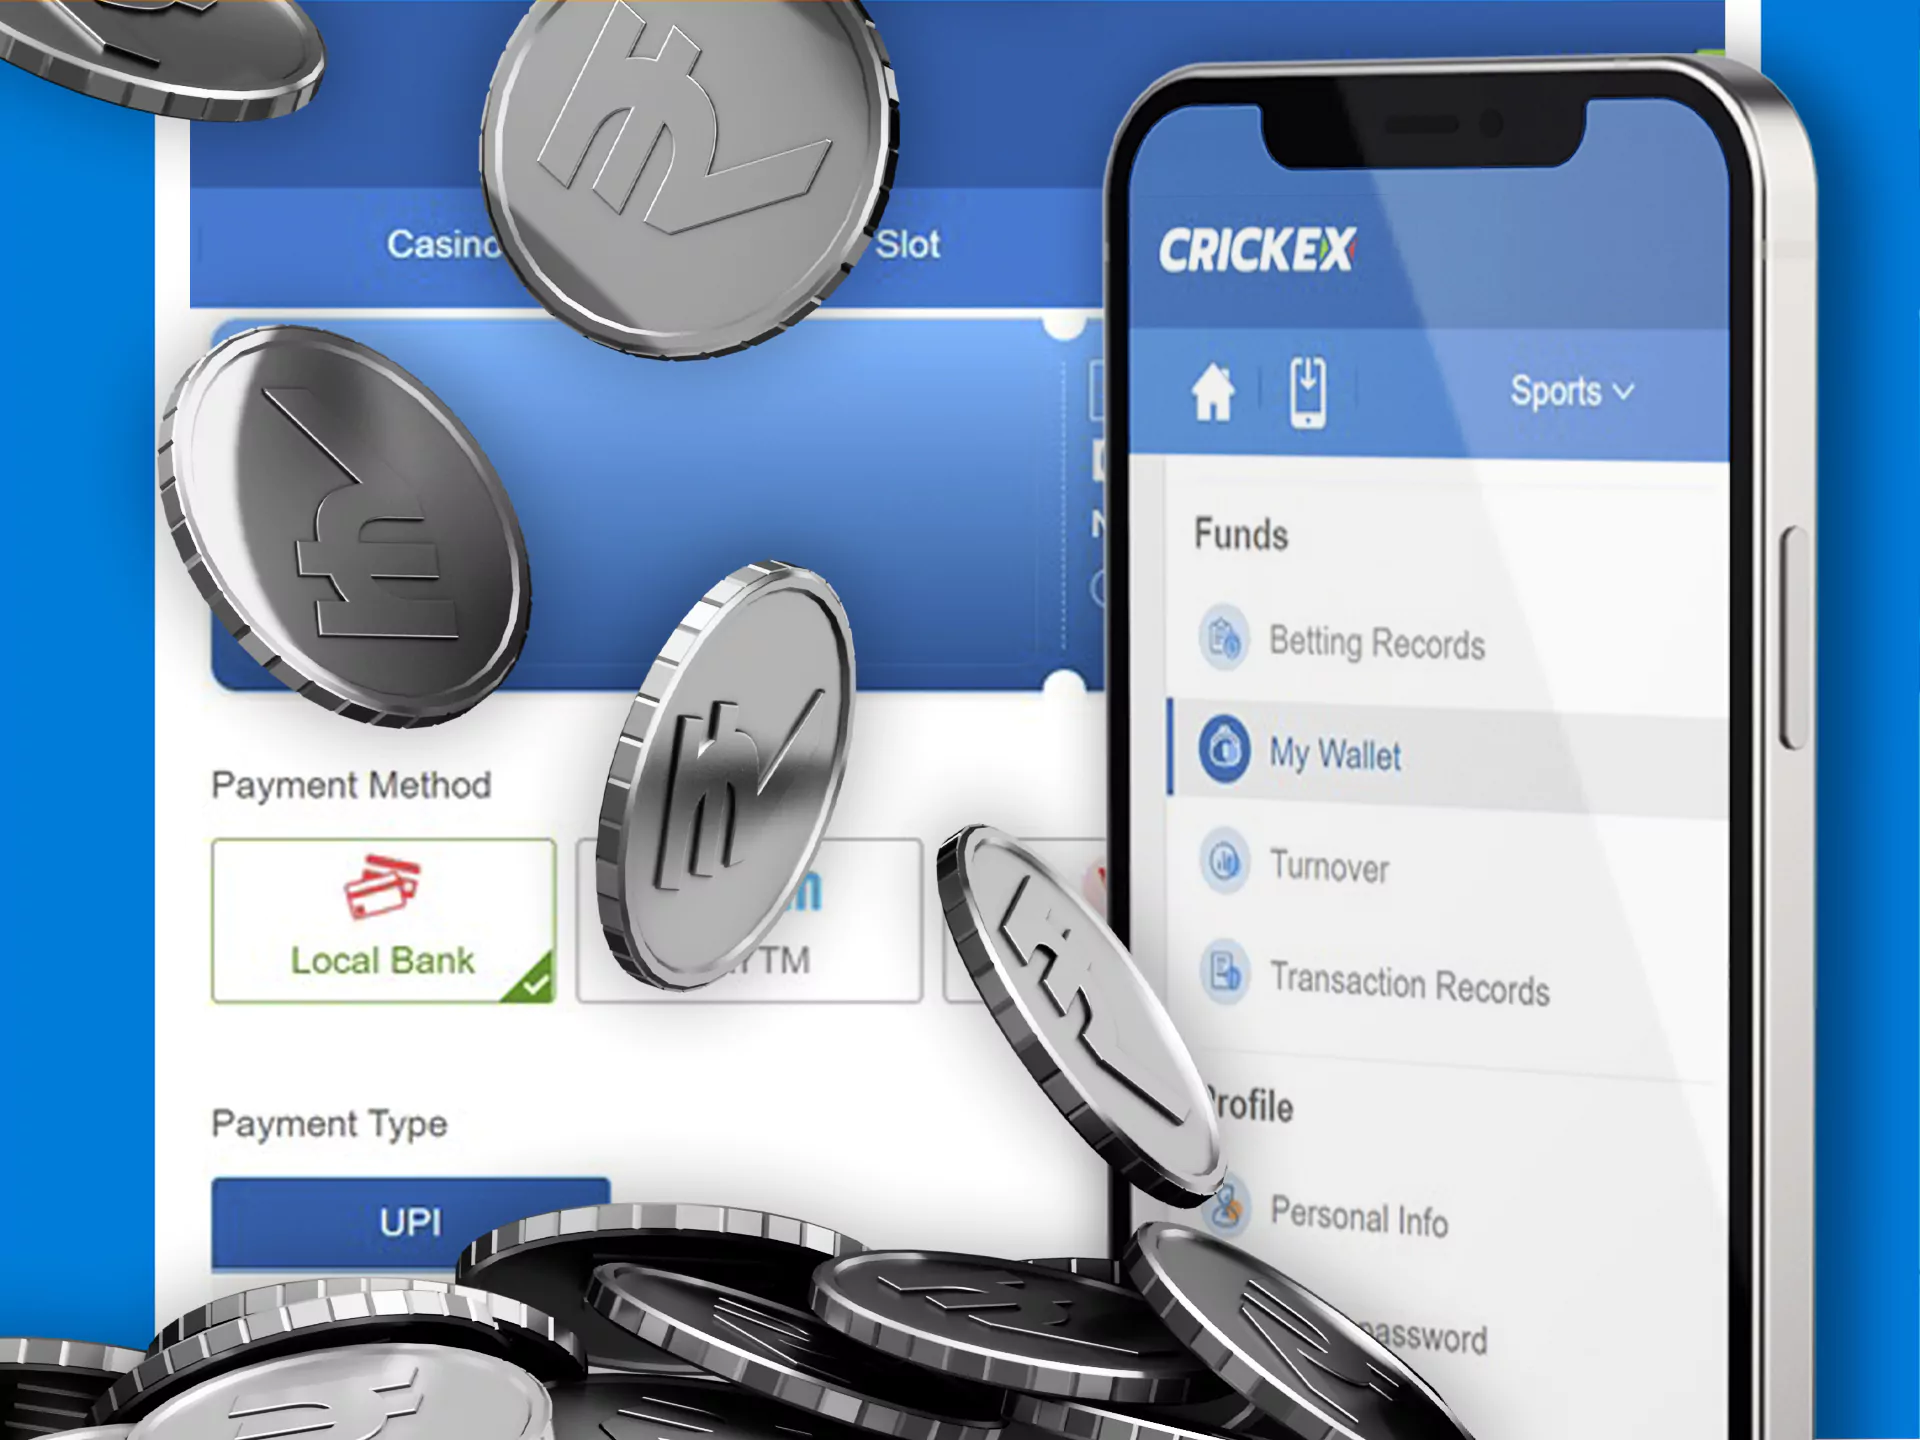 Popular Indian payment systems are available in the Crickex app.